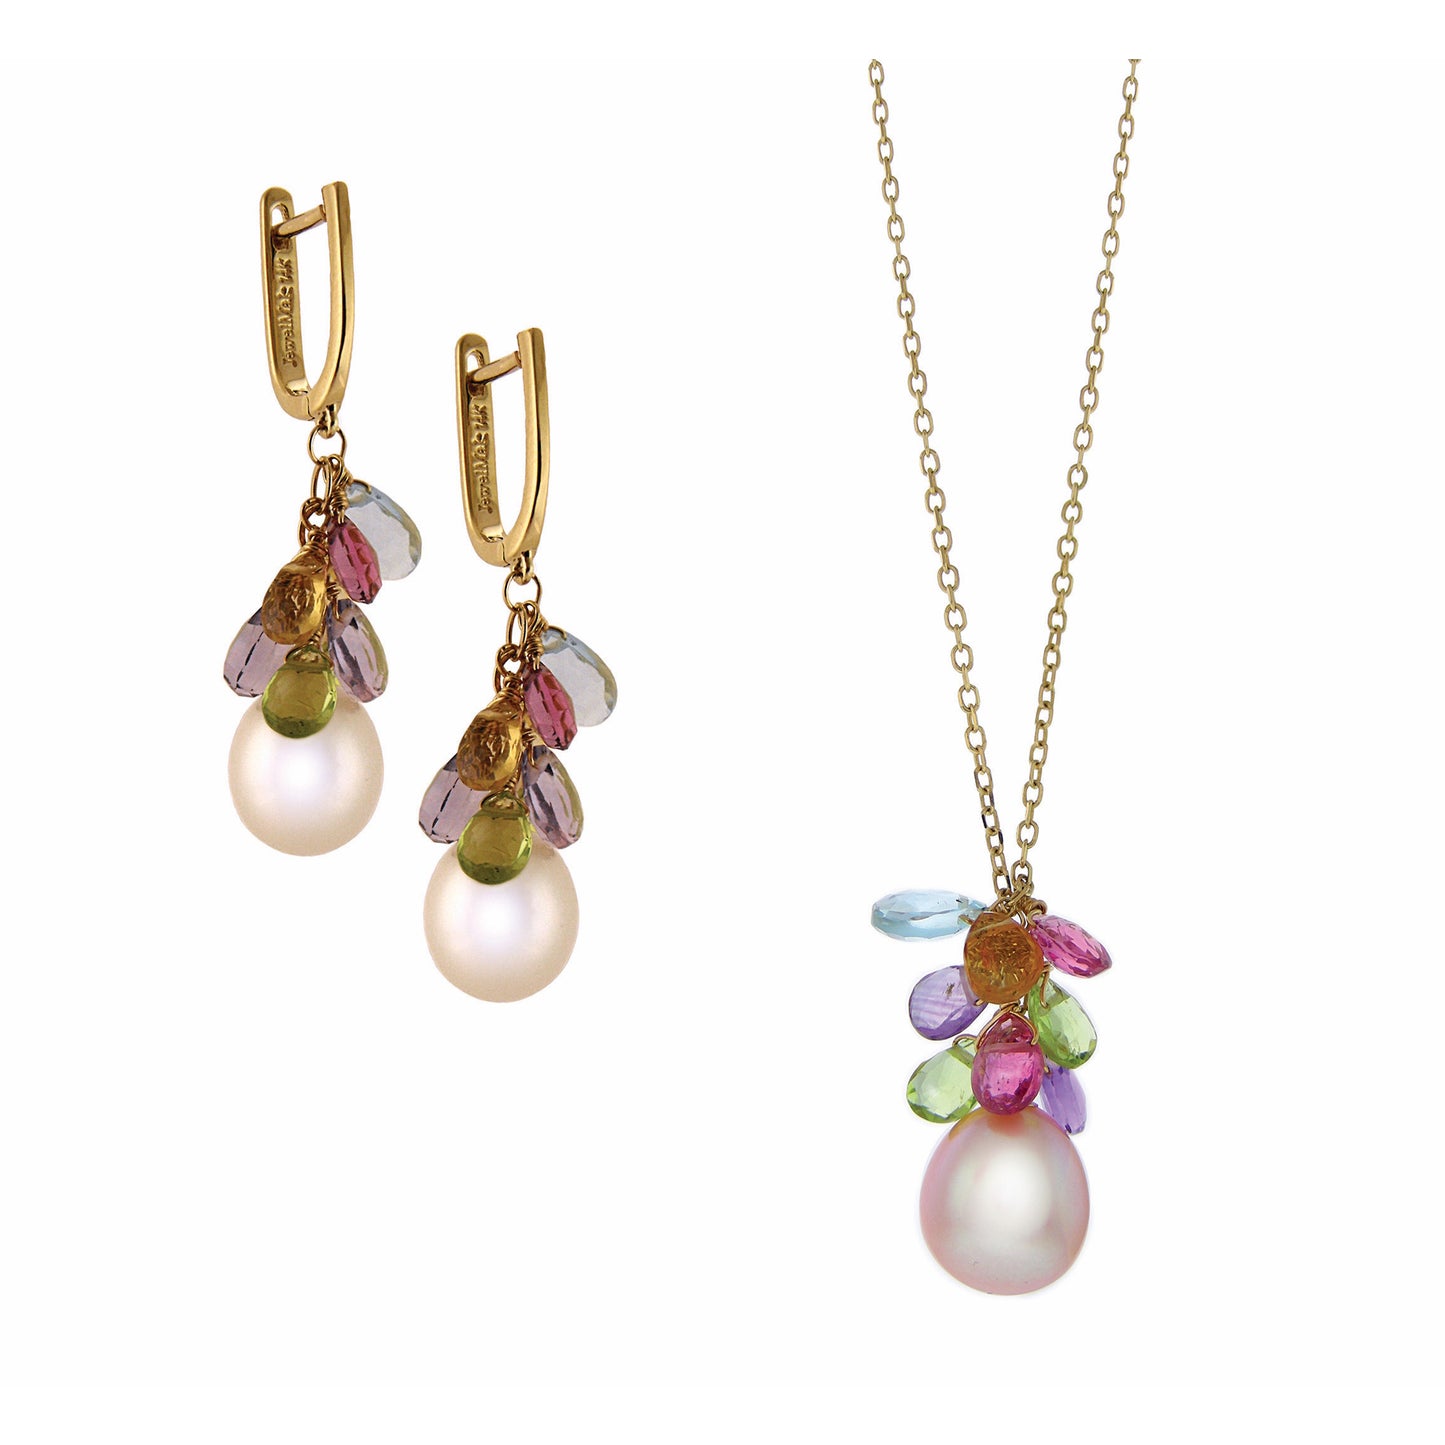 14k White OBL Freshwater Pearl, Peridot, Blue Topaz, Pink Tourmaline, and Amethyst Necklace 17"